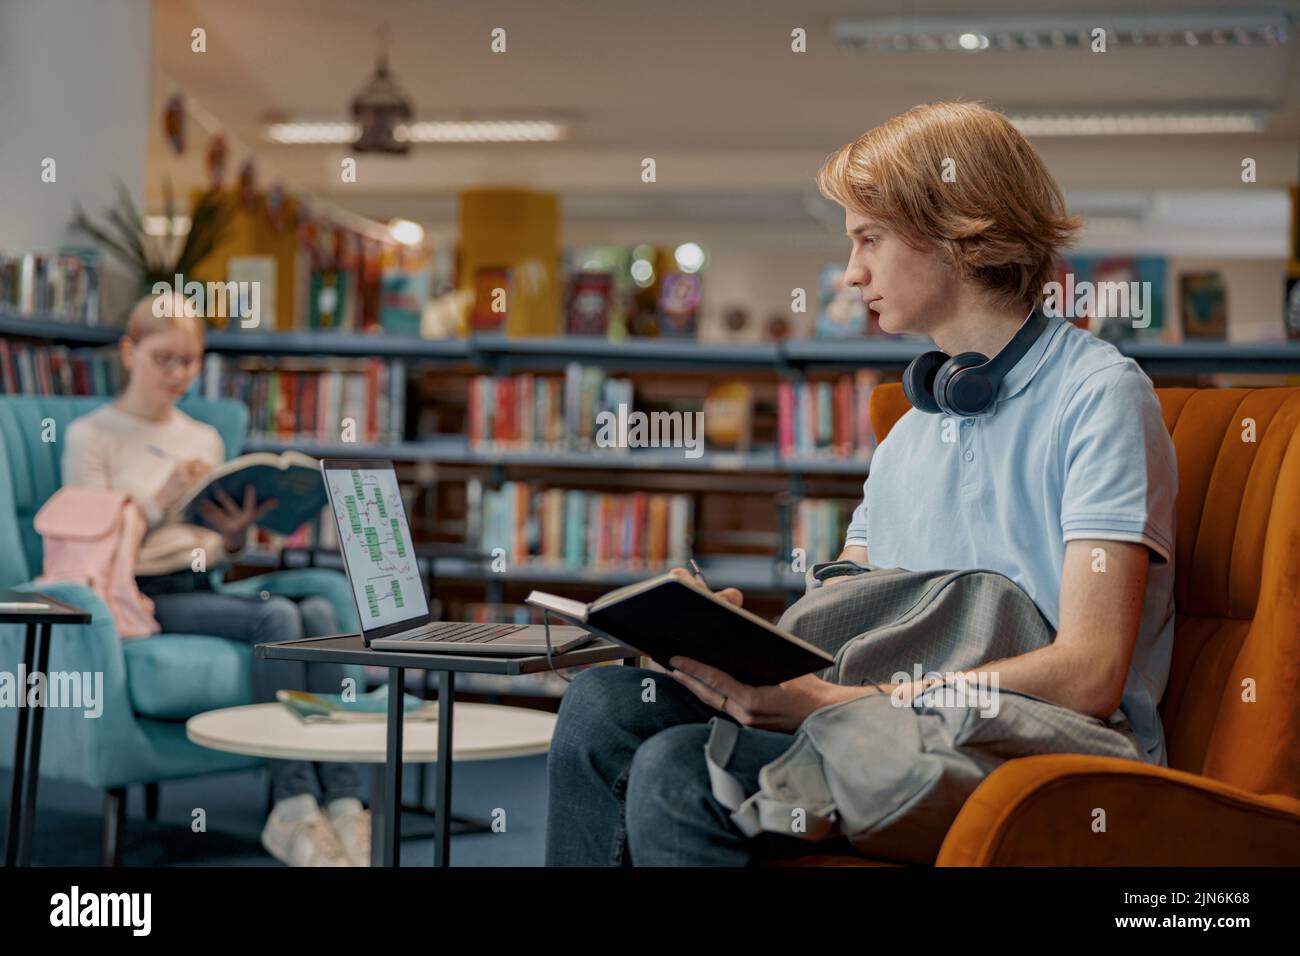 Friends student sit near bookshelves in library and studying. Prepearing for exam Stock Photo